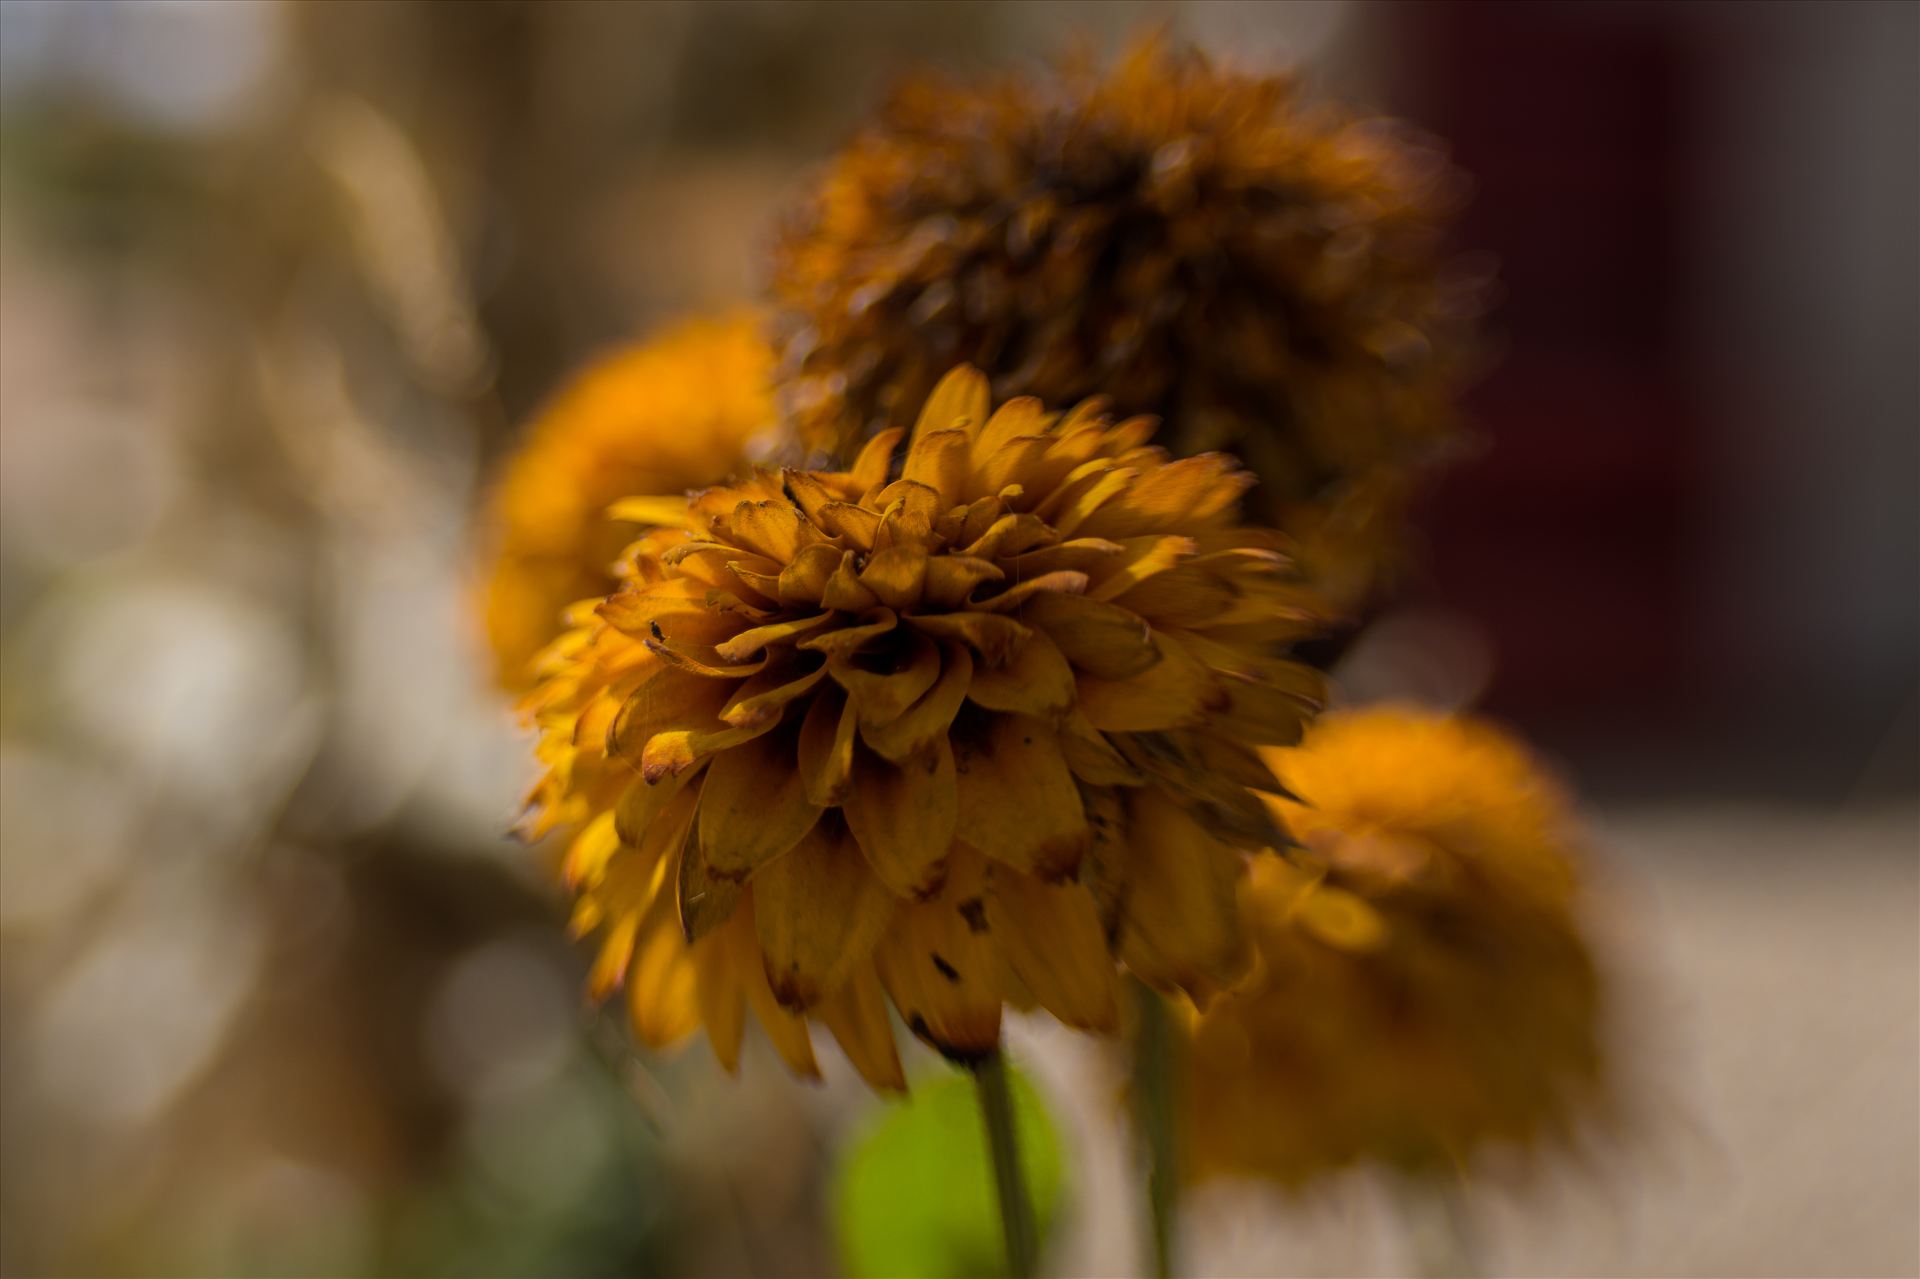 Fall Flower Puff 092715.jpg - Warm Fall Flowers at the Pumpkin Patch by Sarah Williams